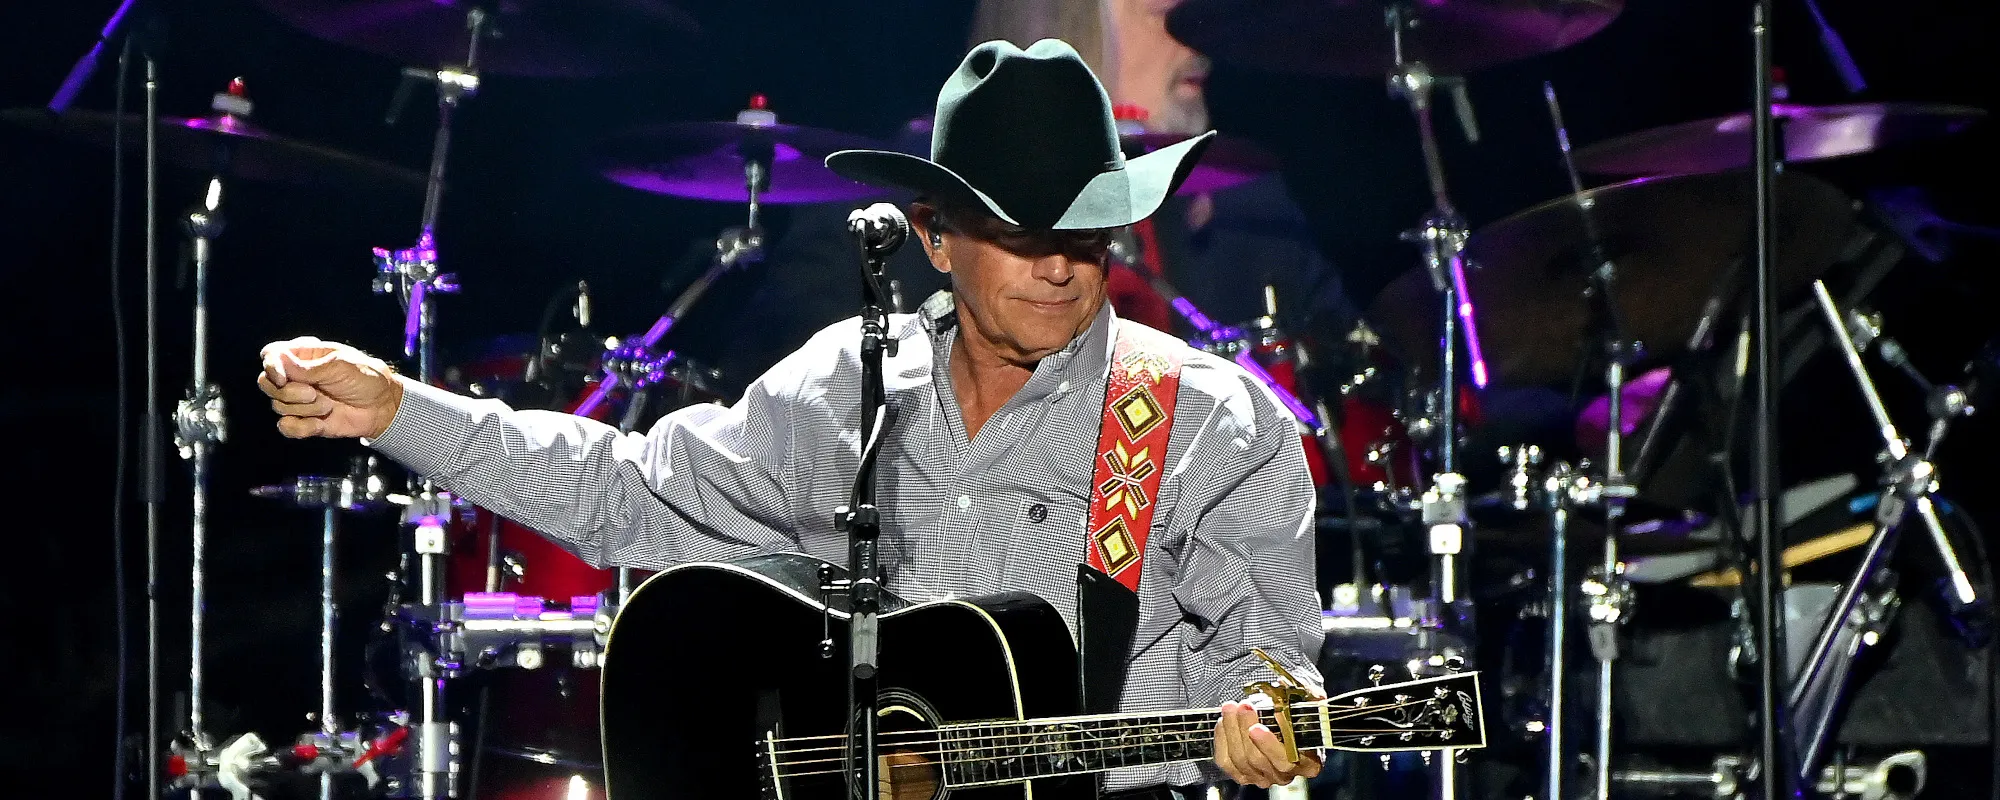 The Story Behind “I Cross My Heart” By George Strait